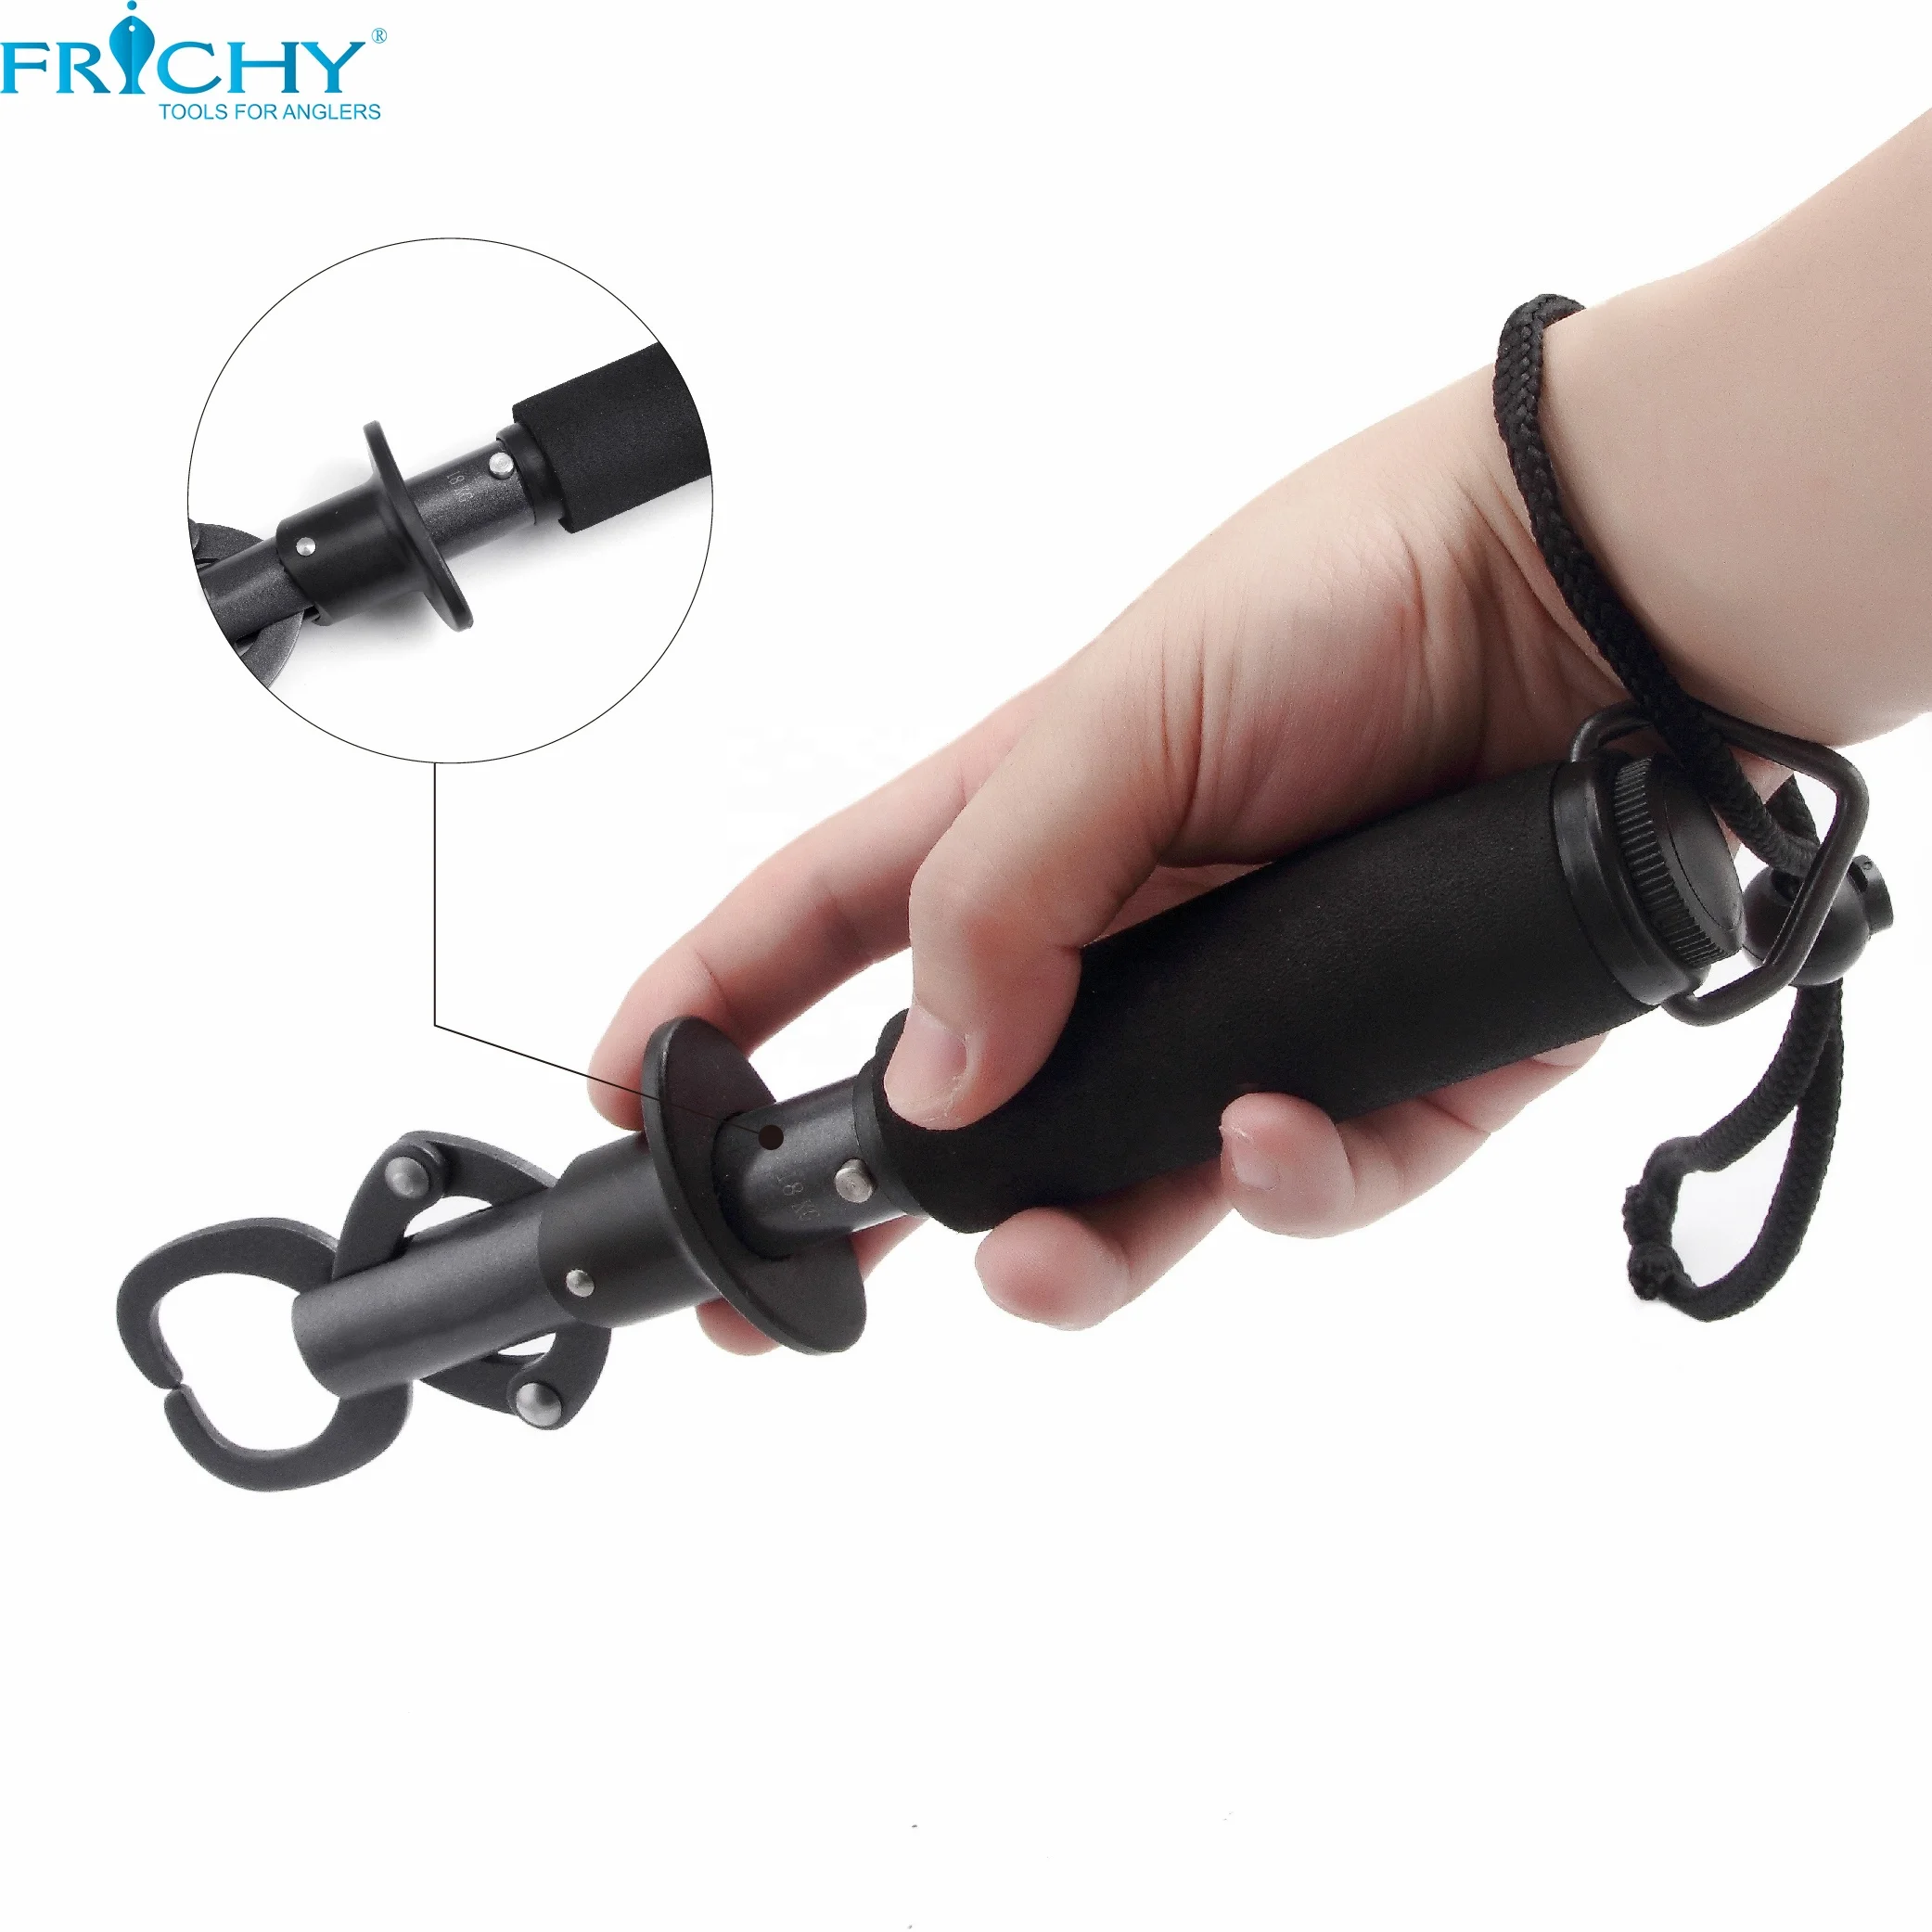 FRICHY X32 STAINLESS STEEL FISH LIP GRIP WITH SCALE FISHING TOOL